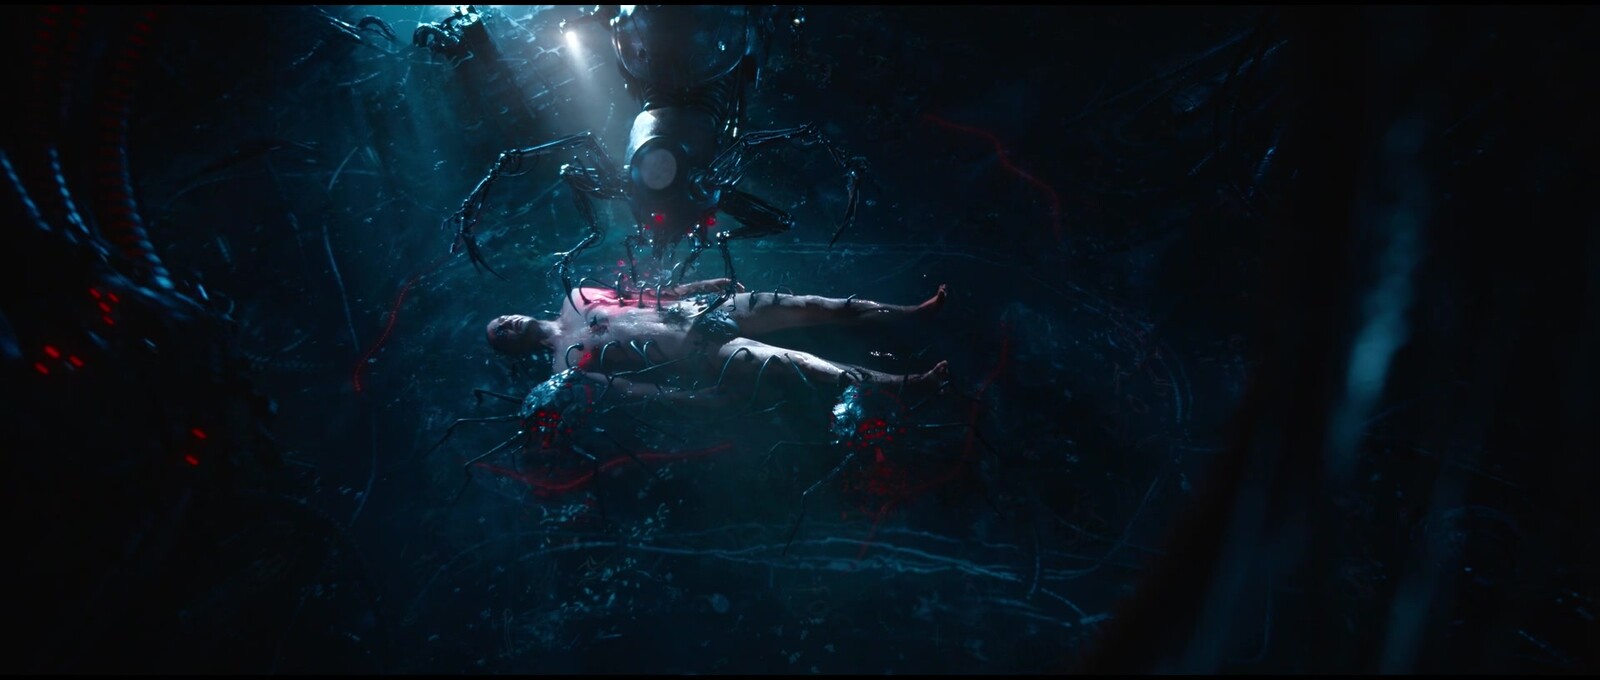 Frame from the movie scene. 
You can see two crab bots in the water below Neo's body,